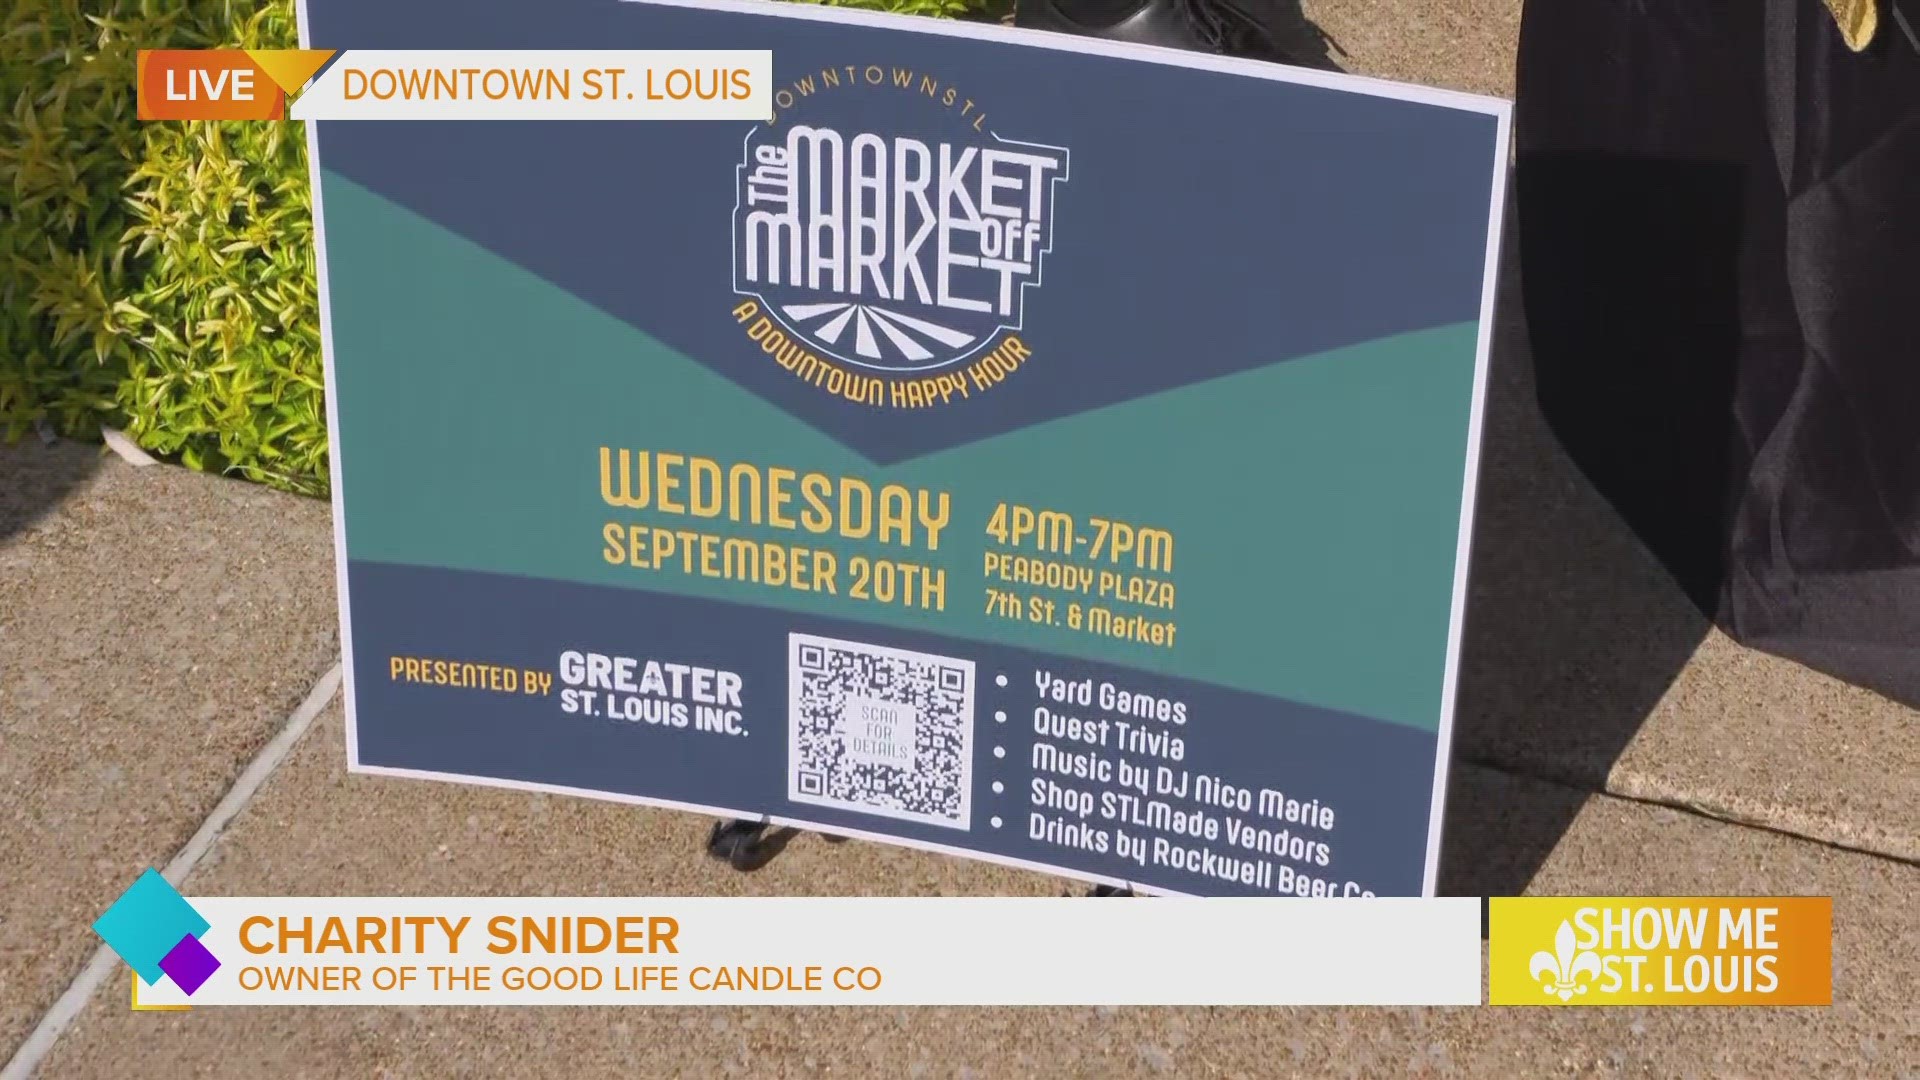 Market Off Market is one of many efforts organized by Greater St. Louis, Inc. to increase vibrancy, boost local businesses, and encourage foot traffic in Downtown.